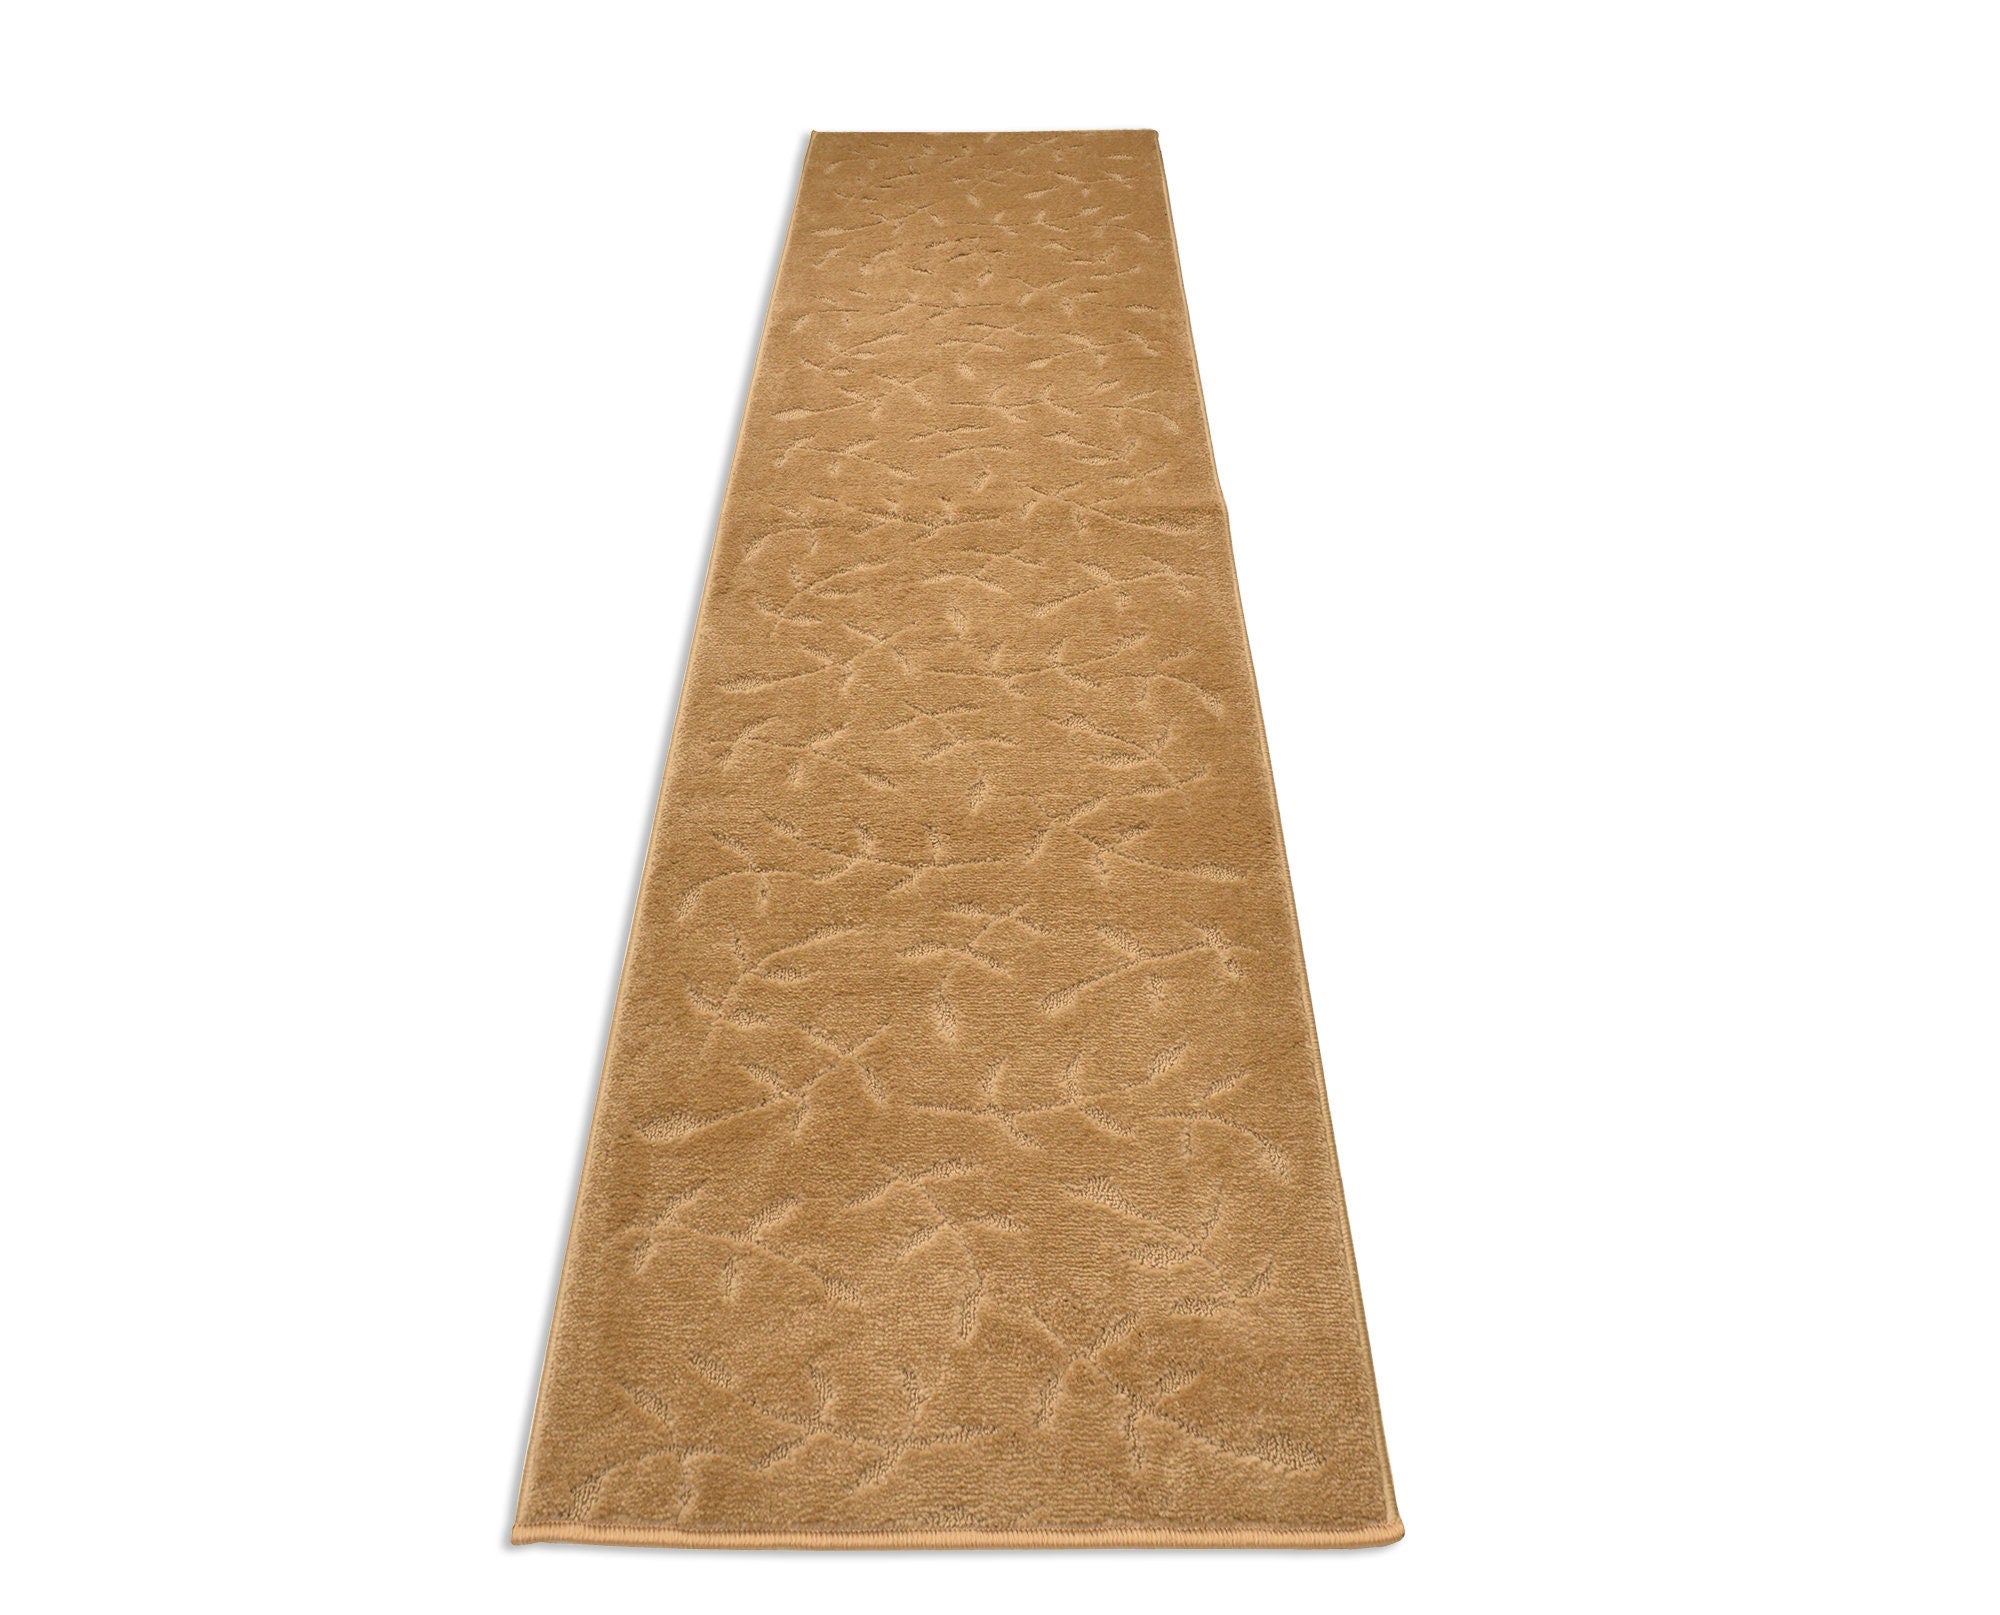 Custom Size Runner Rug Solid Floral Scroll Beige Color Skid Resistant Rug Runner Customize Up to 50 Feet and 25 Inch Width Cut to Size Rugs - 0